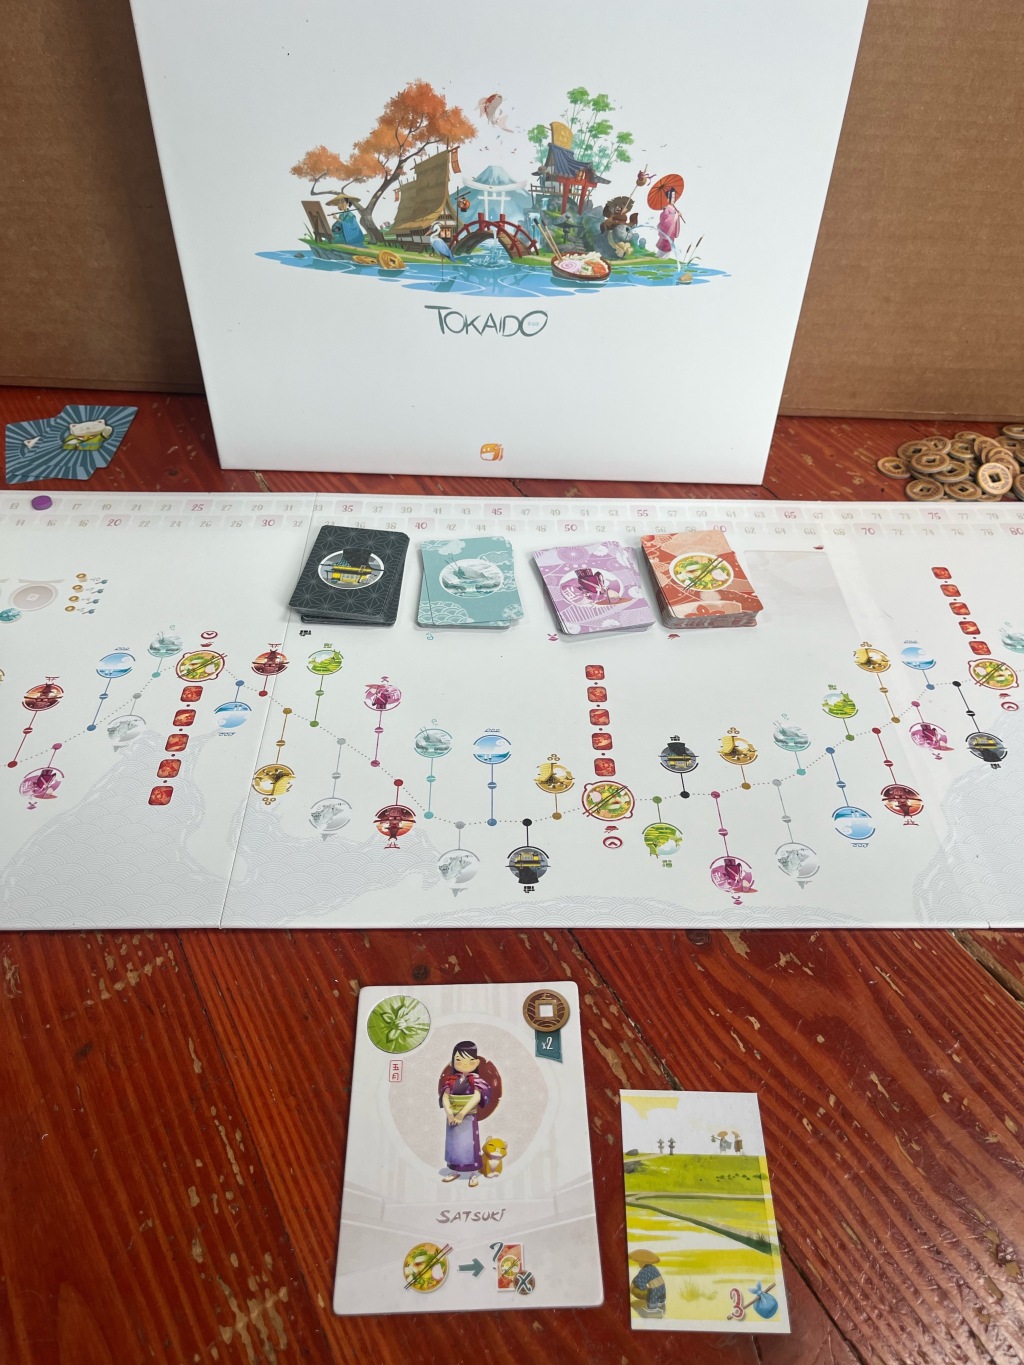 Travel Through Ancient Japan With This Board Game